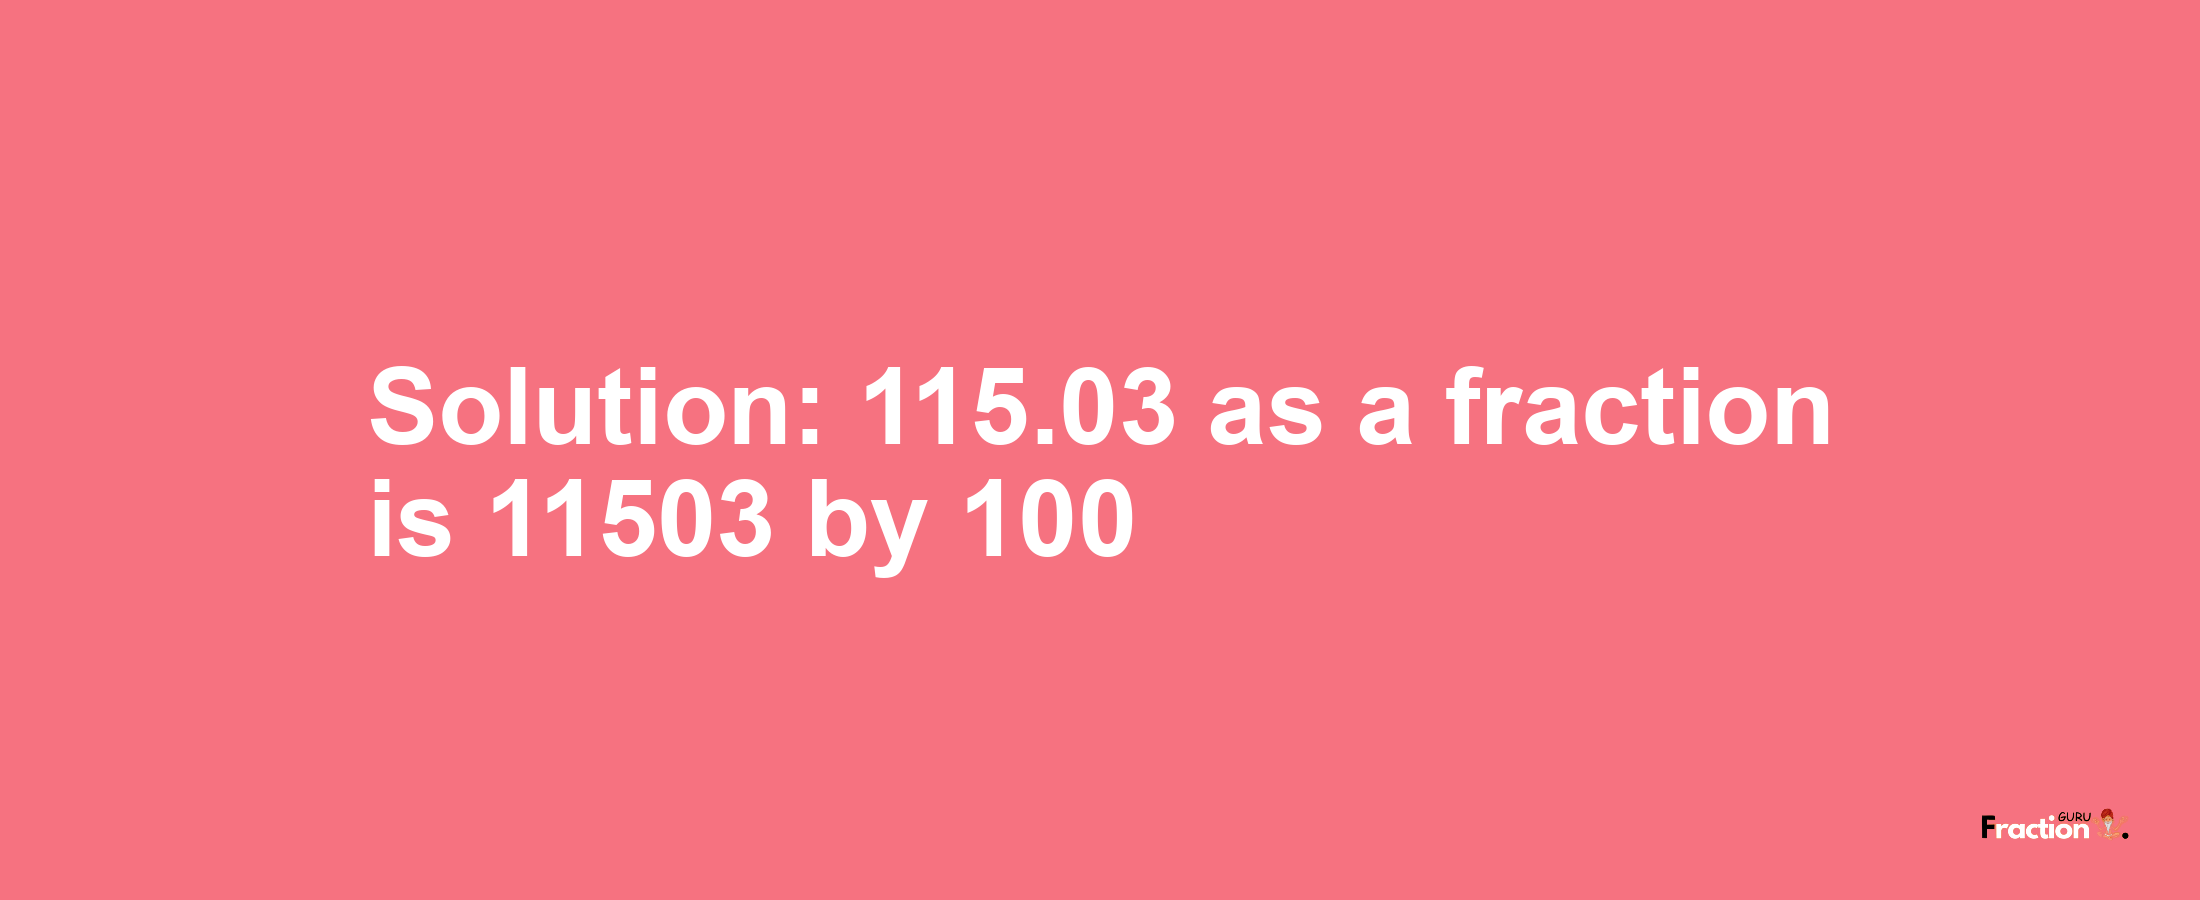 Solution:115.03 as a fraction is 11503/100